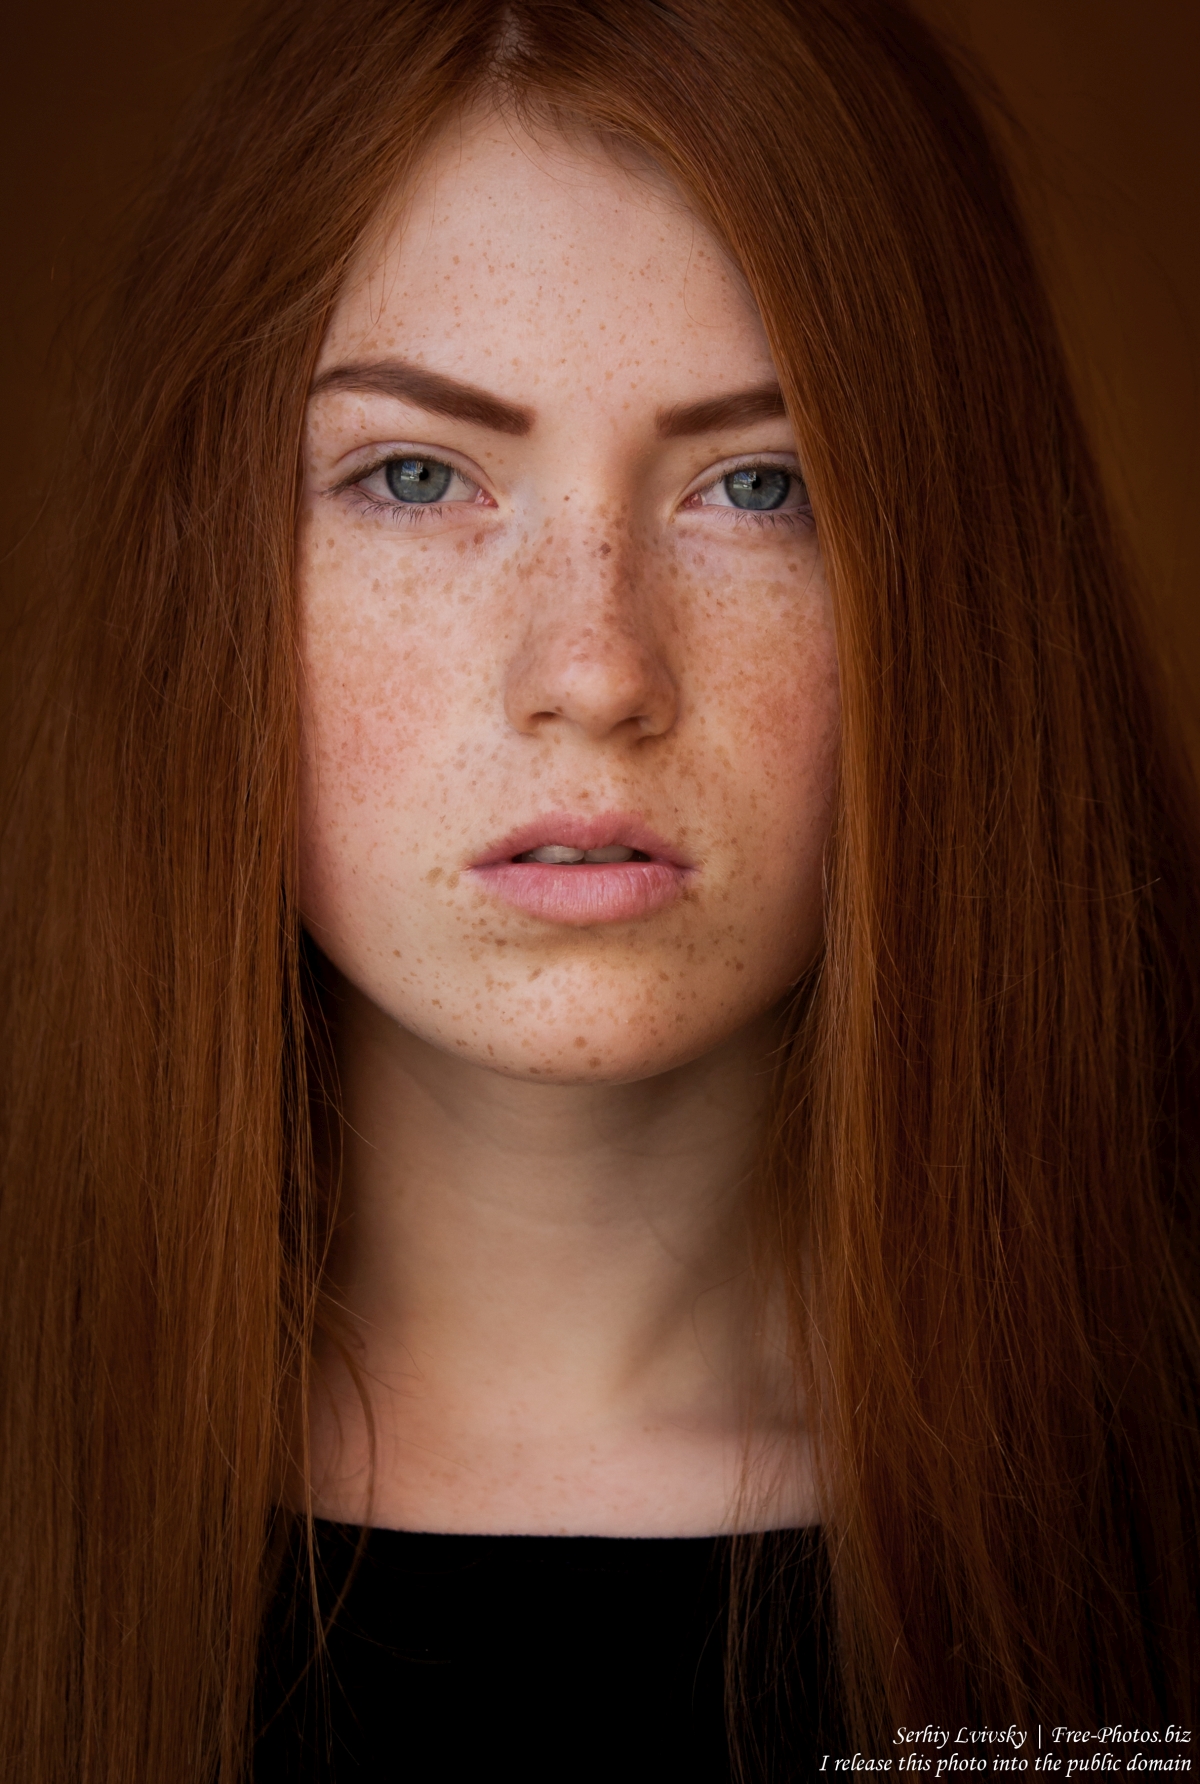 a_15-year-old_red-haired_catholic_girl_photographed_by_serhiy_lvivsky_in_august_2015_11